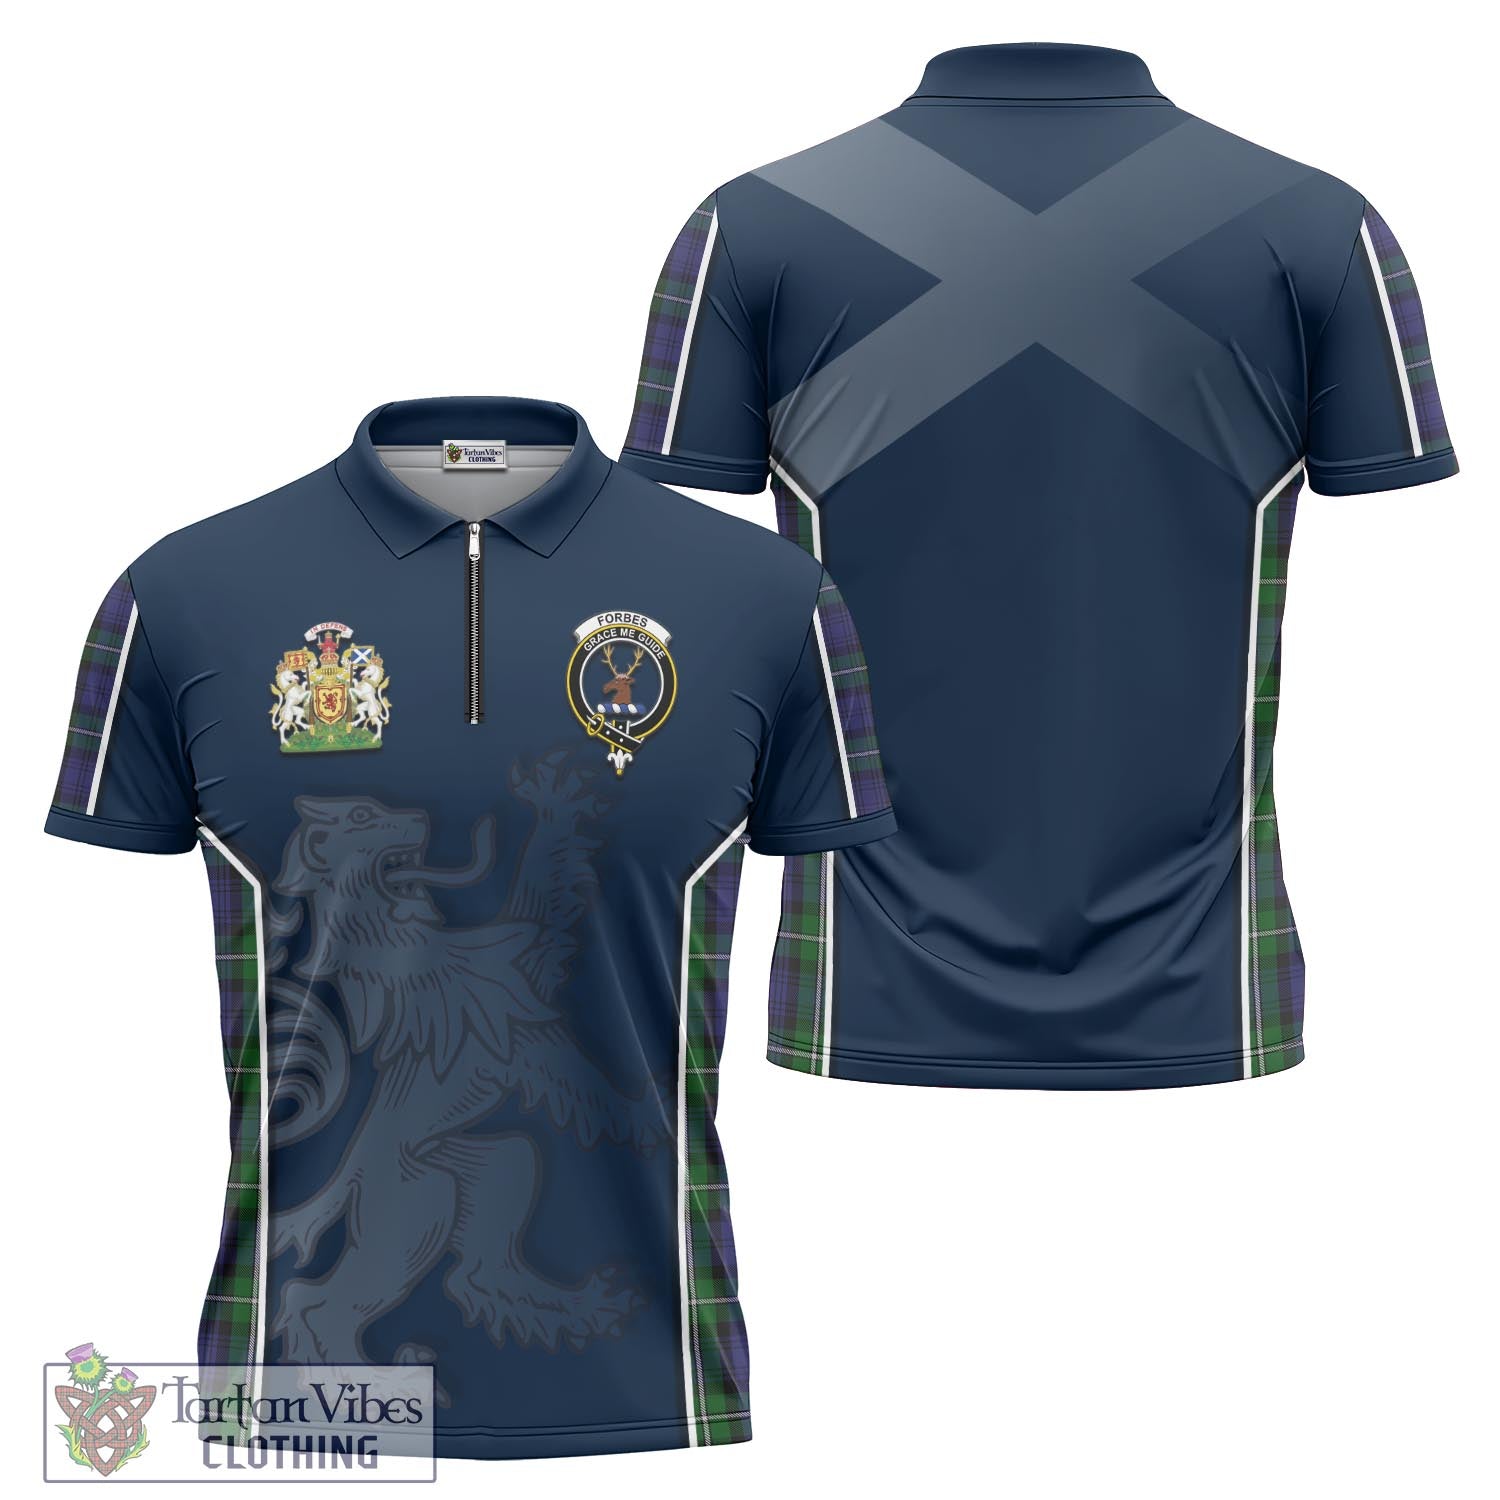 Tartan Vibes Clothing Forbes Tartan Zipper Polo Shirt with Family Crest and Lion Rampant Vibes Sport Style